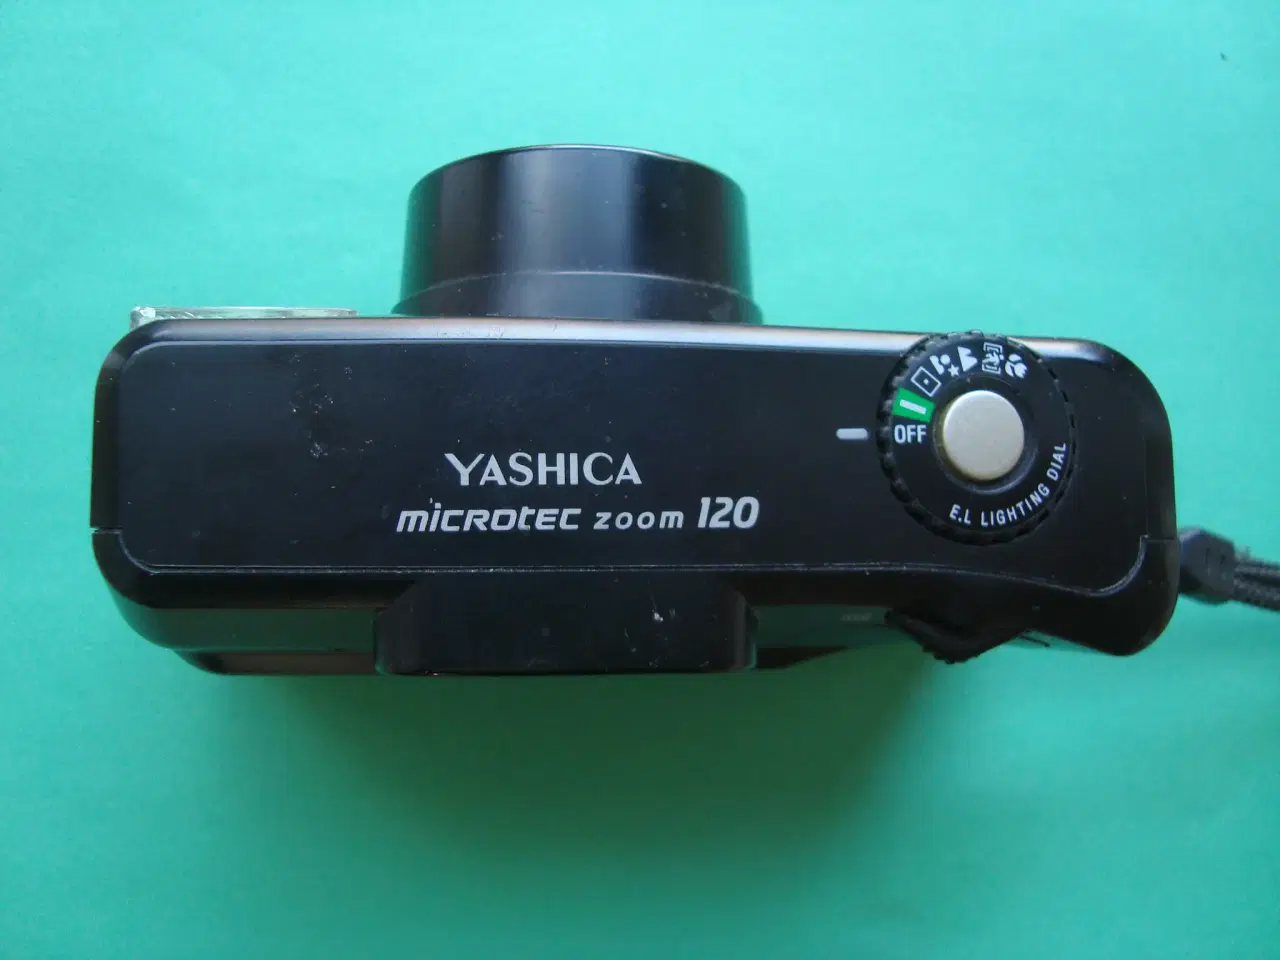 Billede 1 - Yashica microtex zoom 120